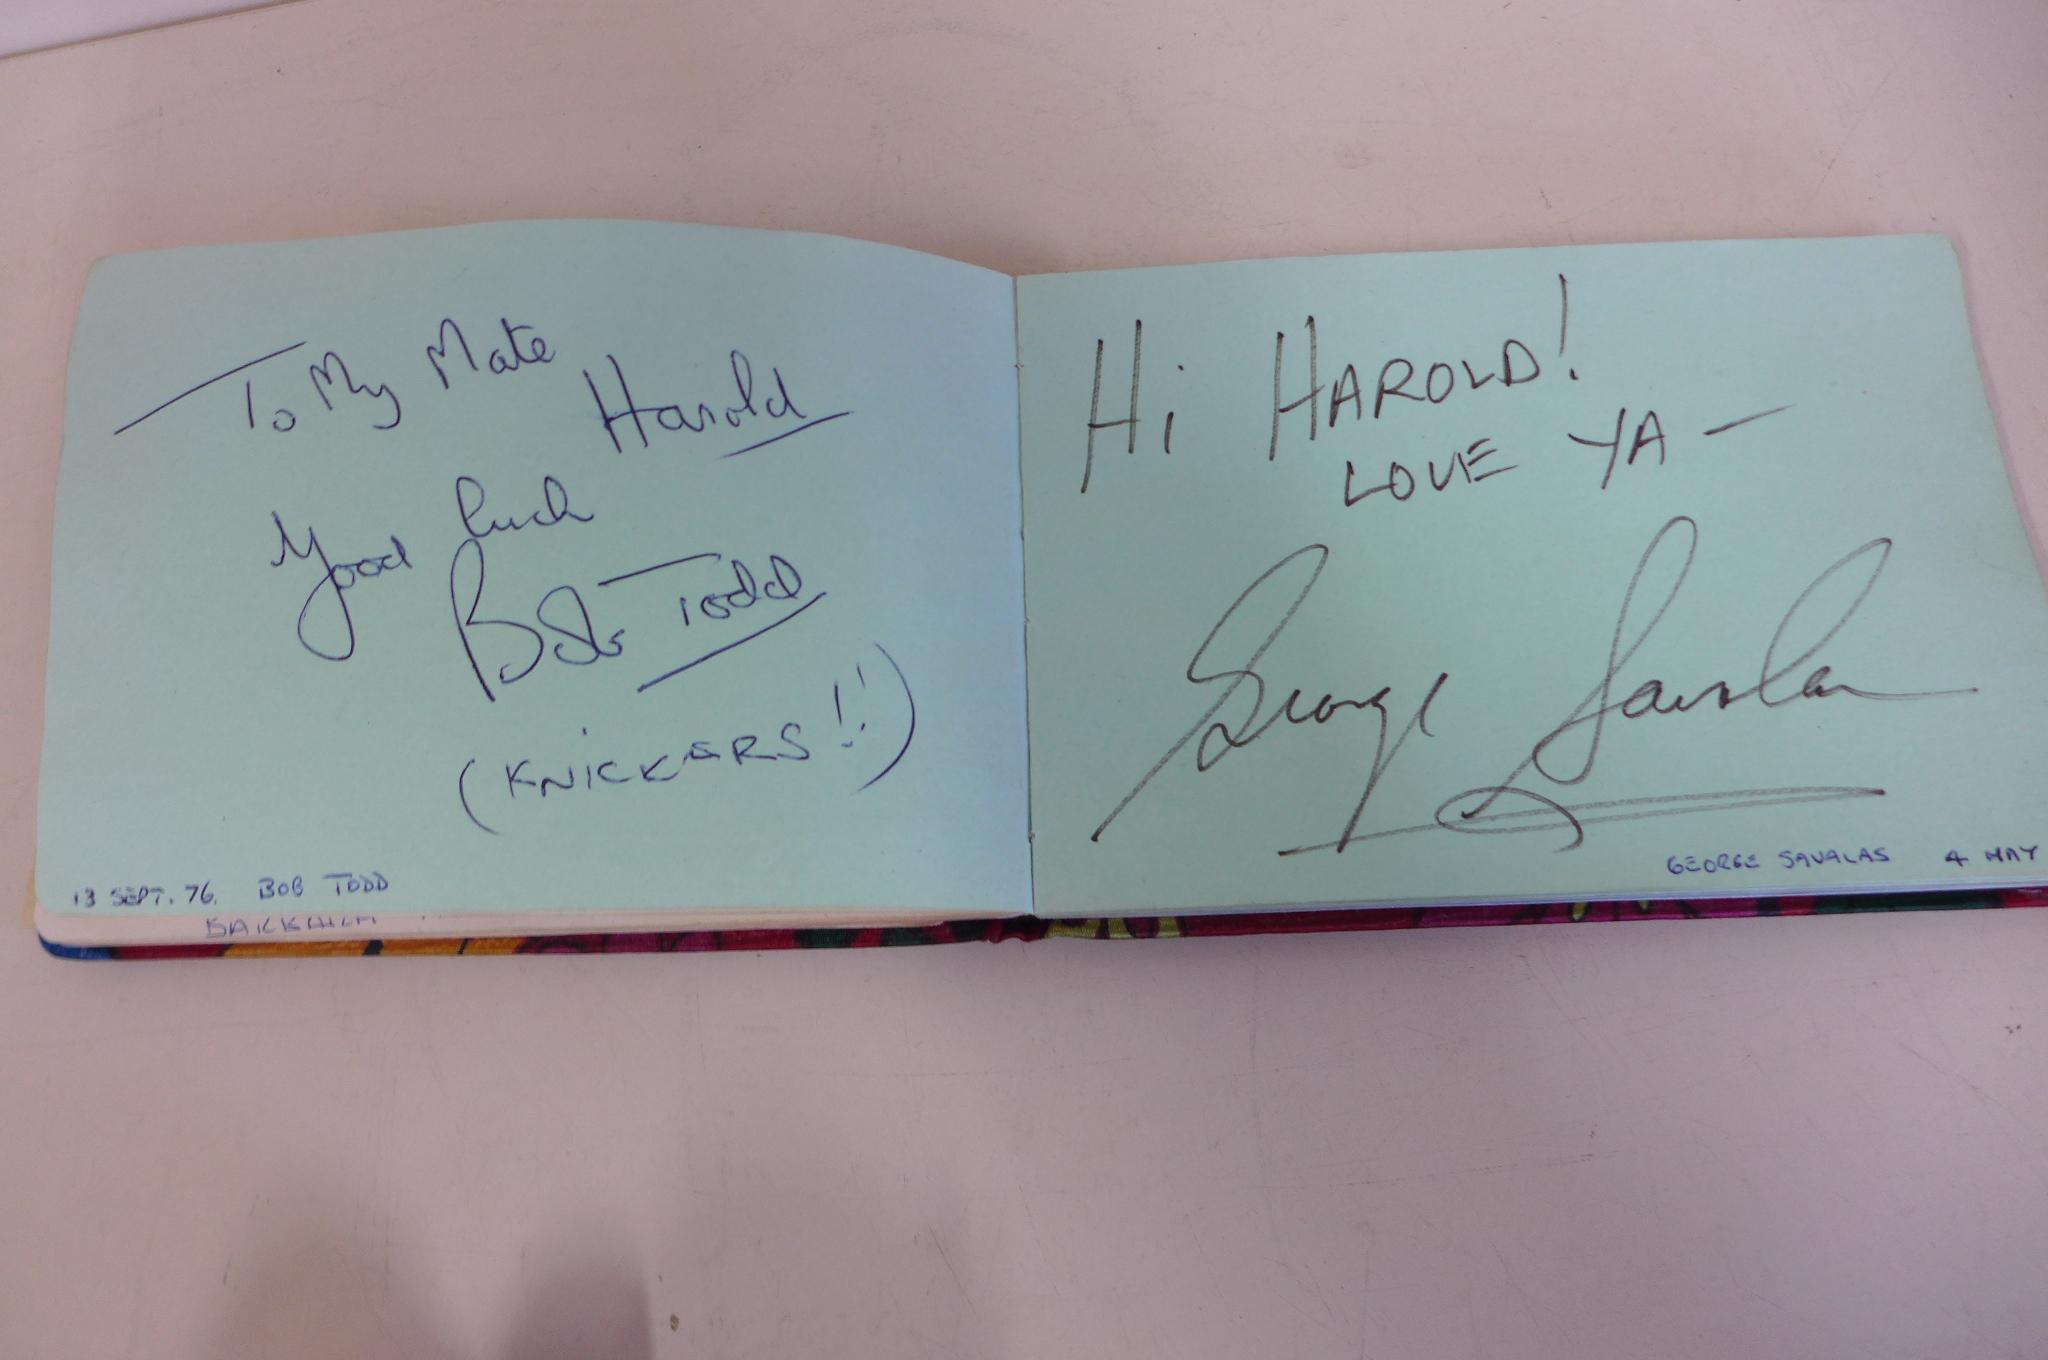 An interesting autograph book with autographs, including Topol, Christopher Lee, Ava Gardner, - Image 8 of 11